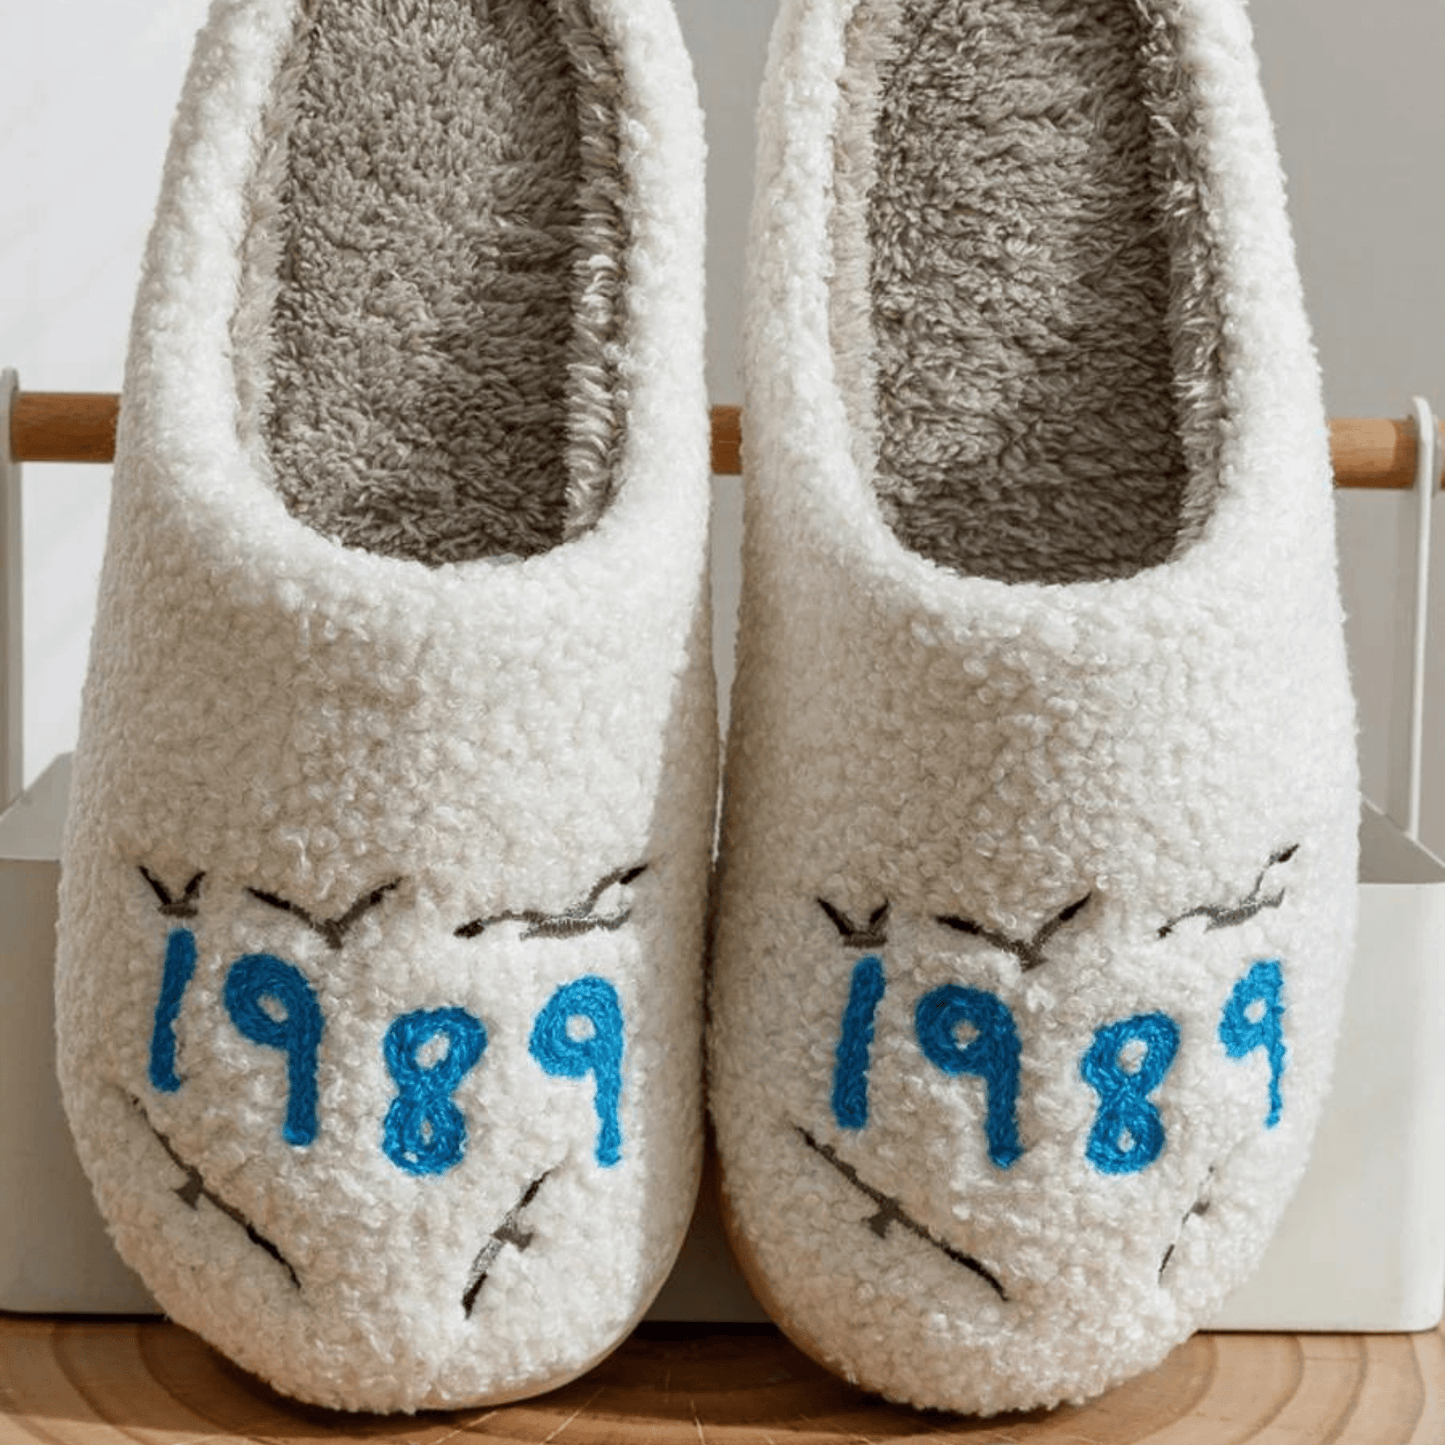 1989 Taylors Version Slippers - Taylor Swift Slippers